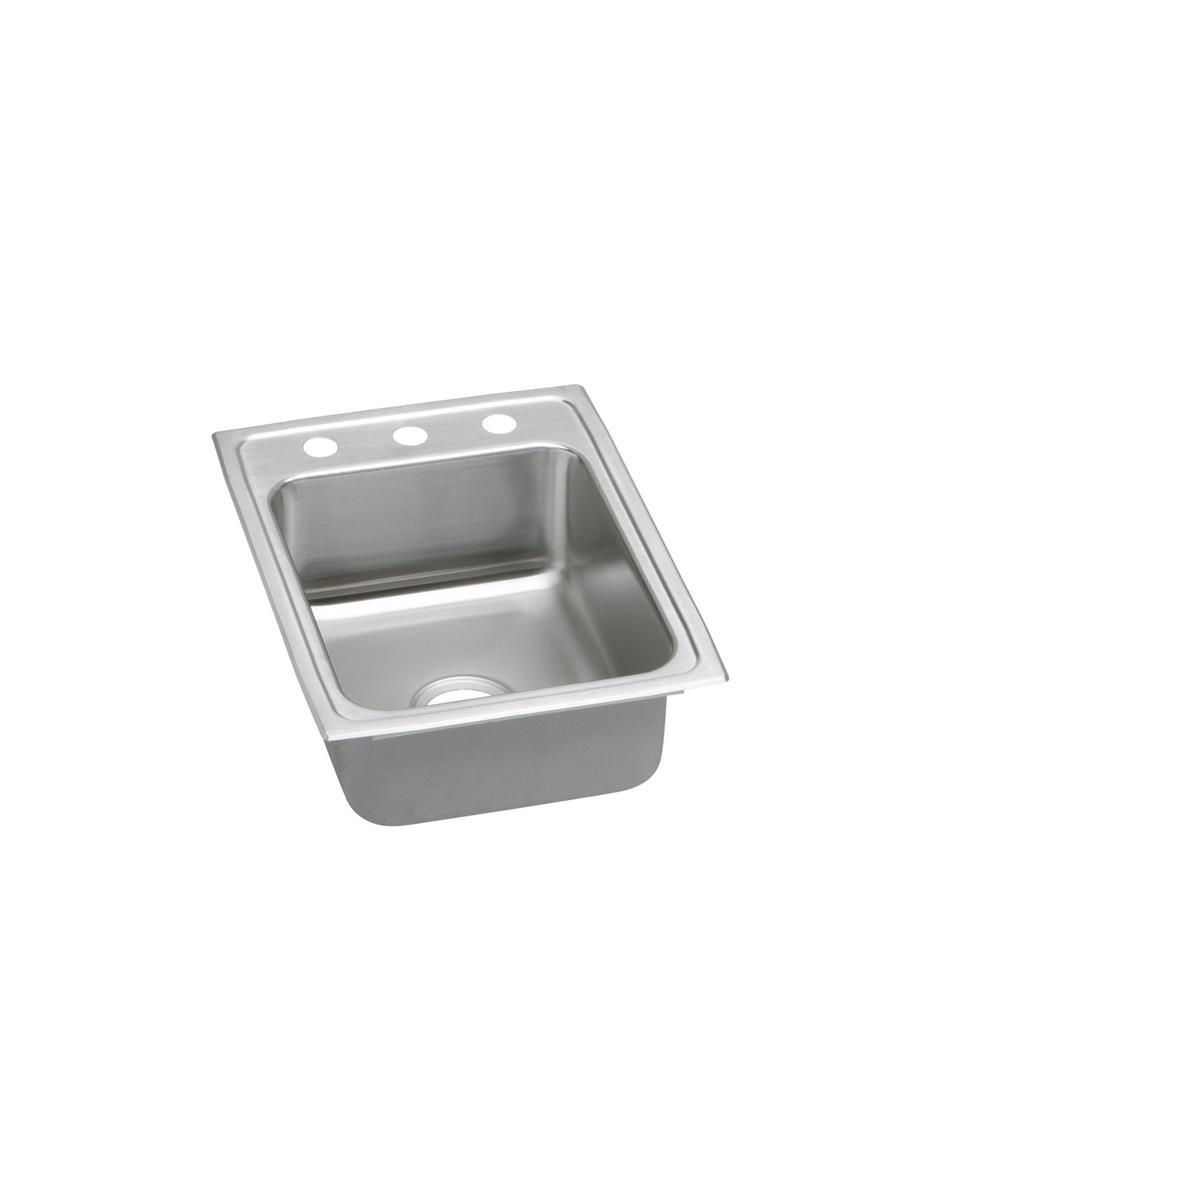 Elkay Lustertone Classic 17" x 22" x 6-1/2" Single Bowl Drop-in ADA Sink with Quick-clip